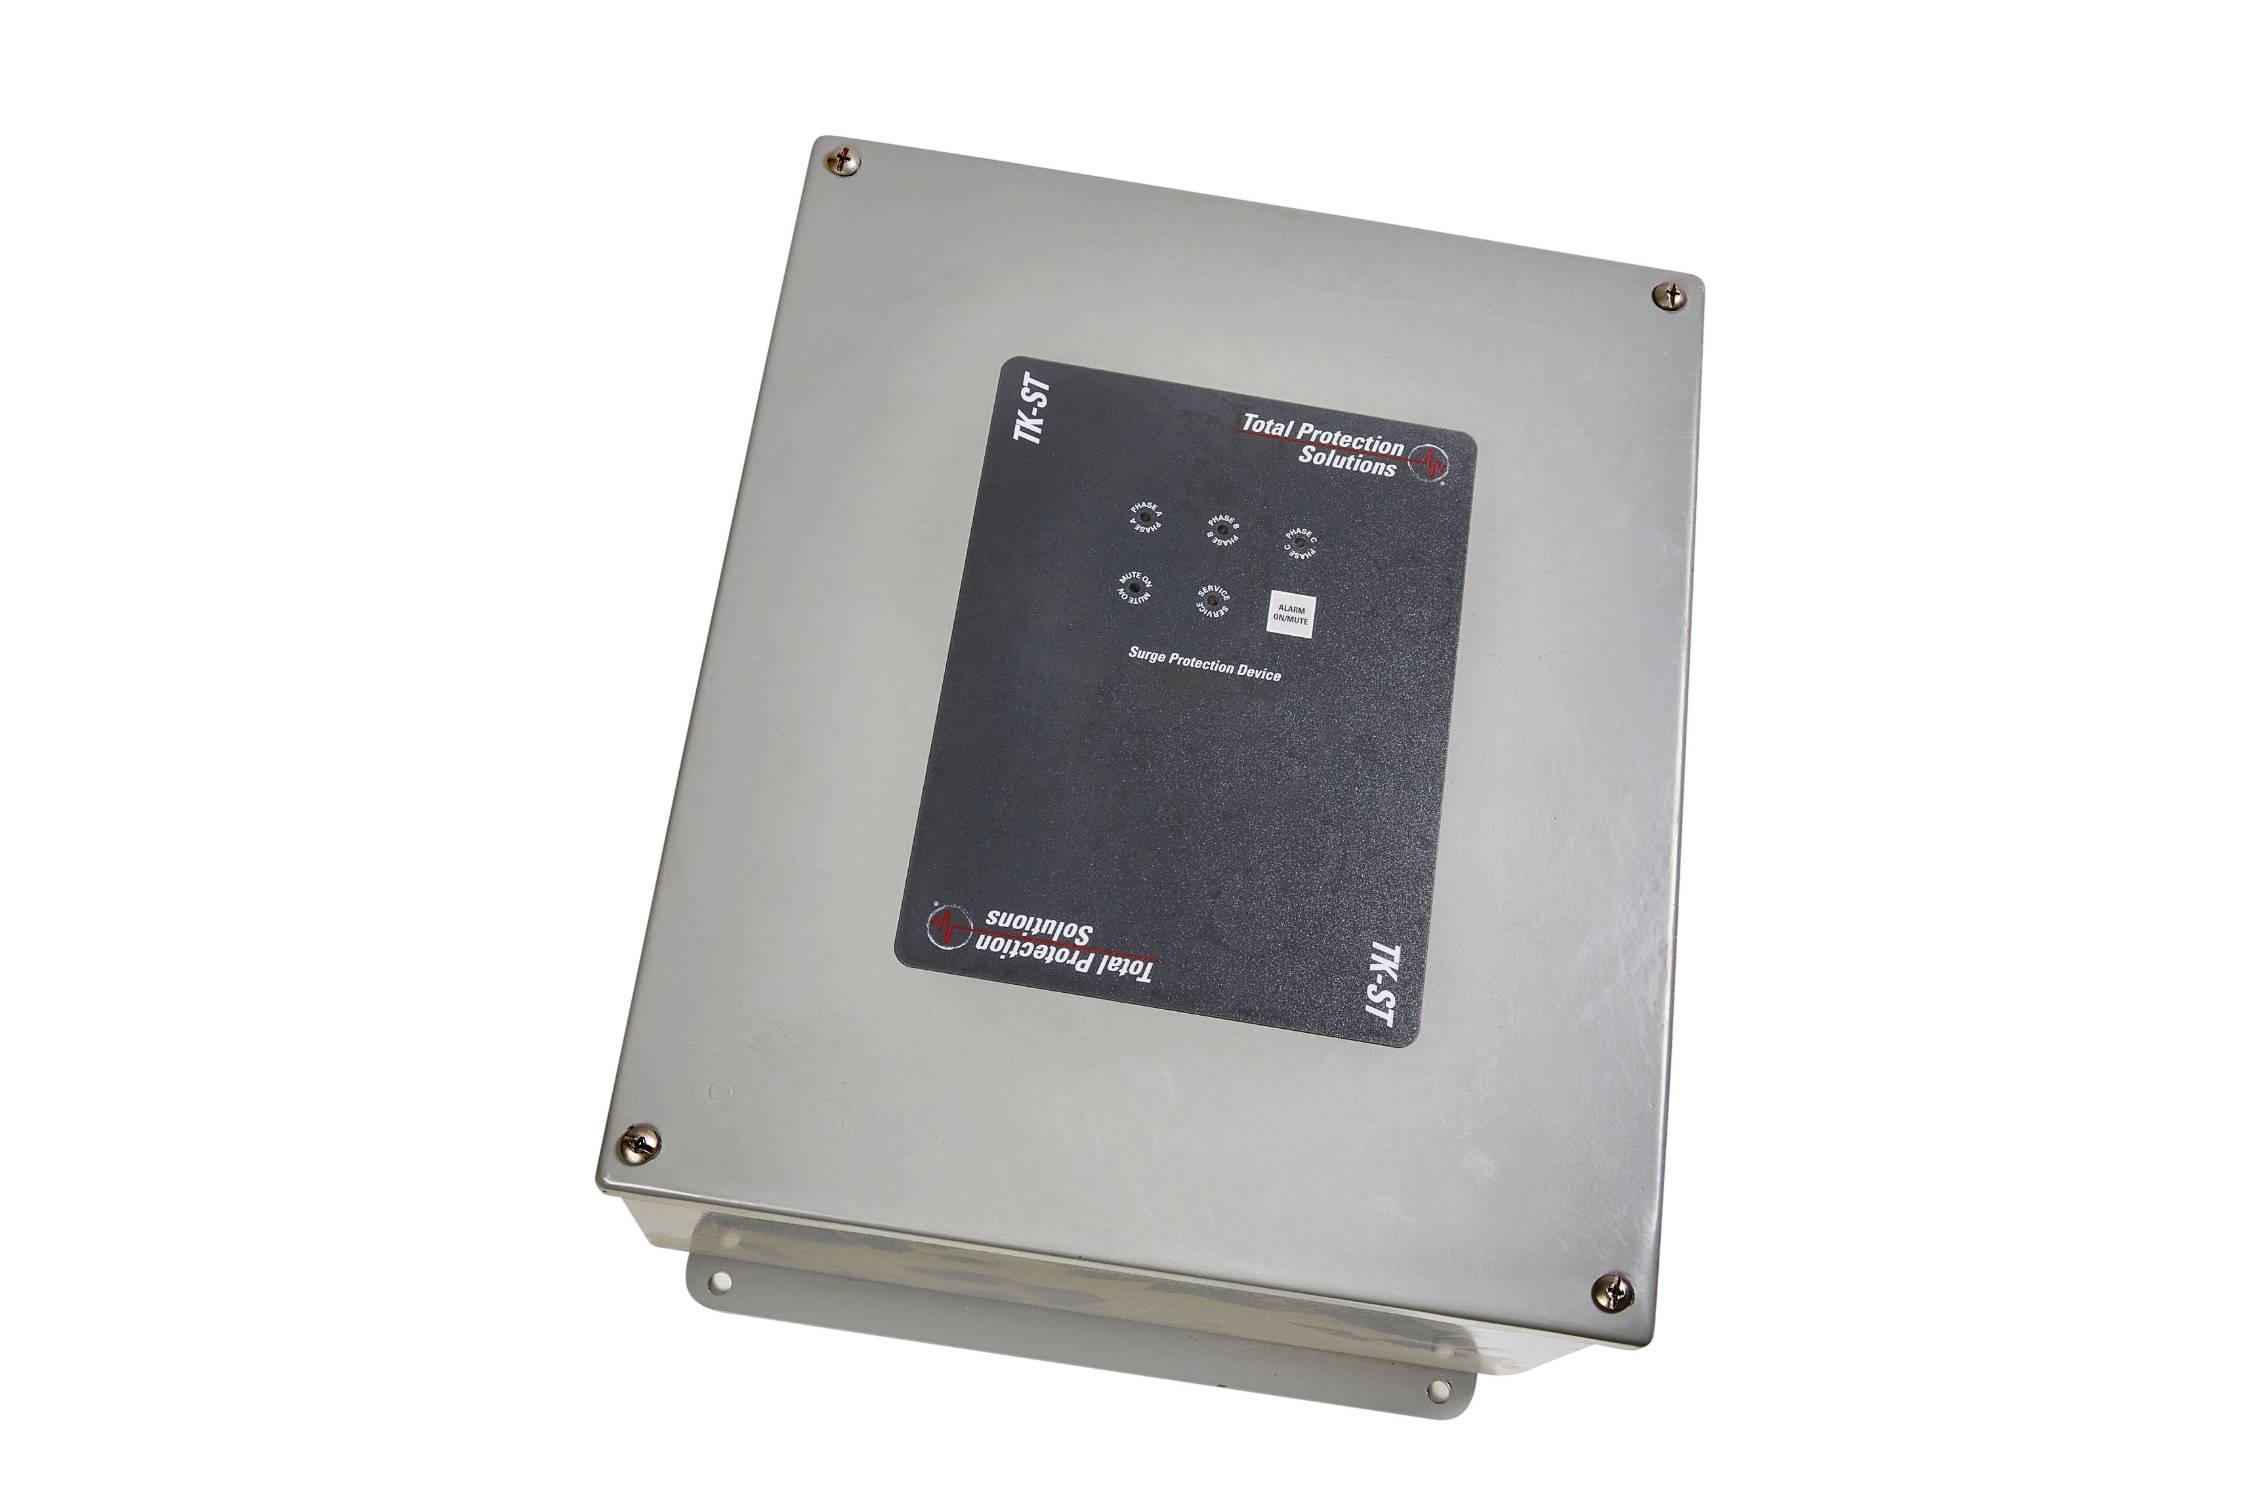 Service Track ST300 - Surge Protection Device